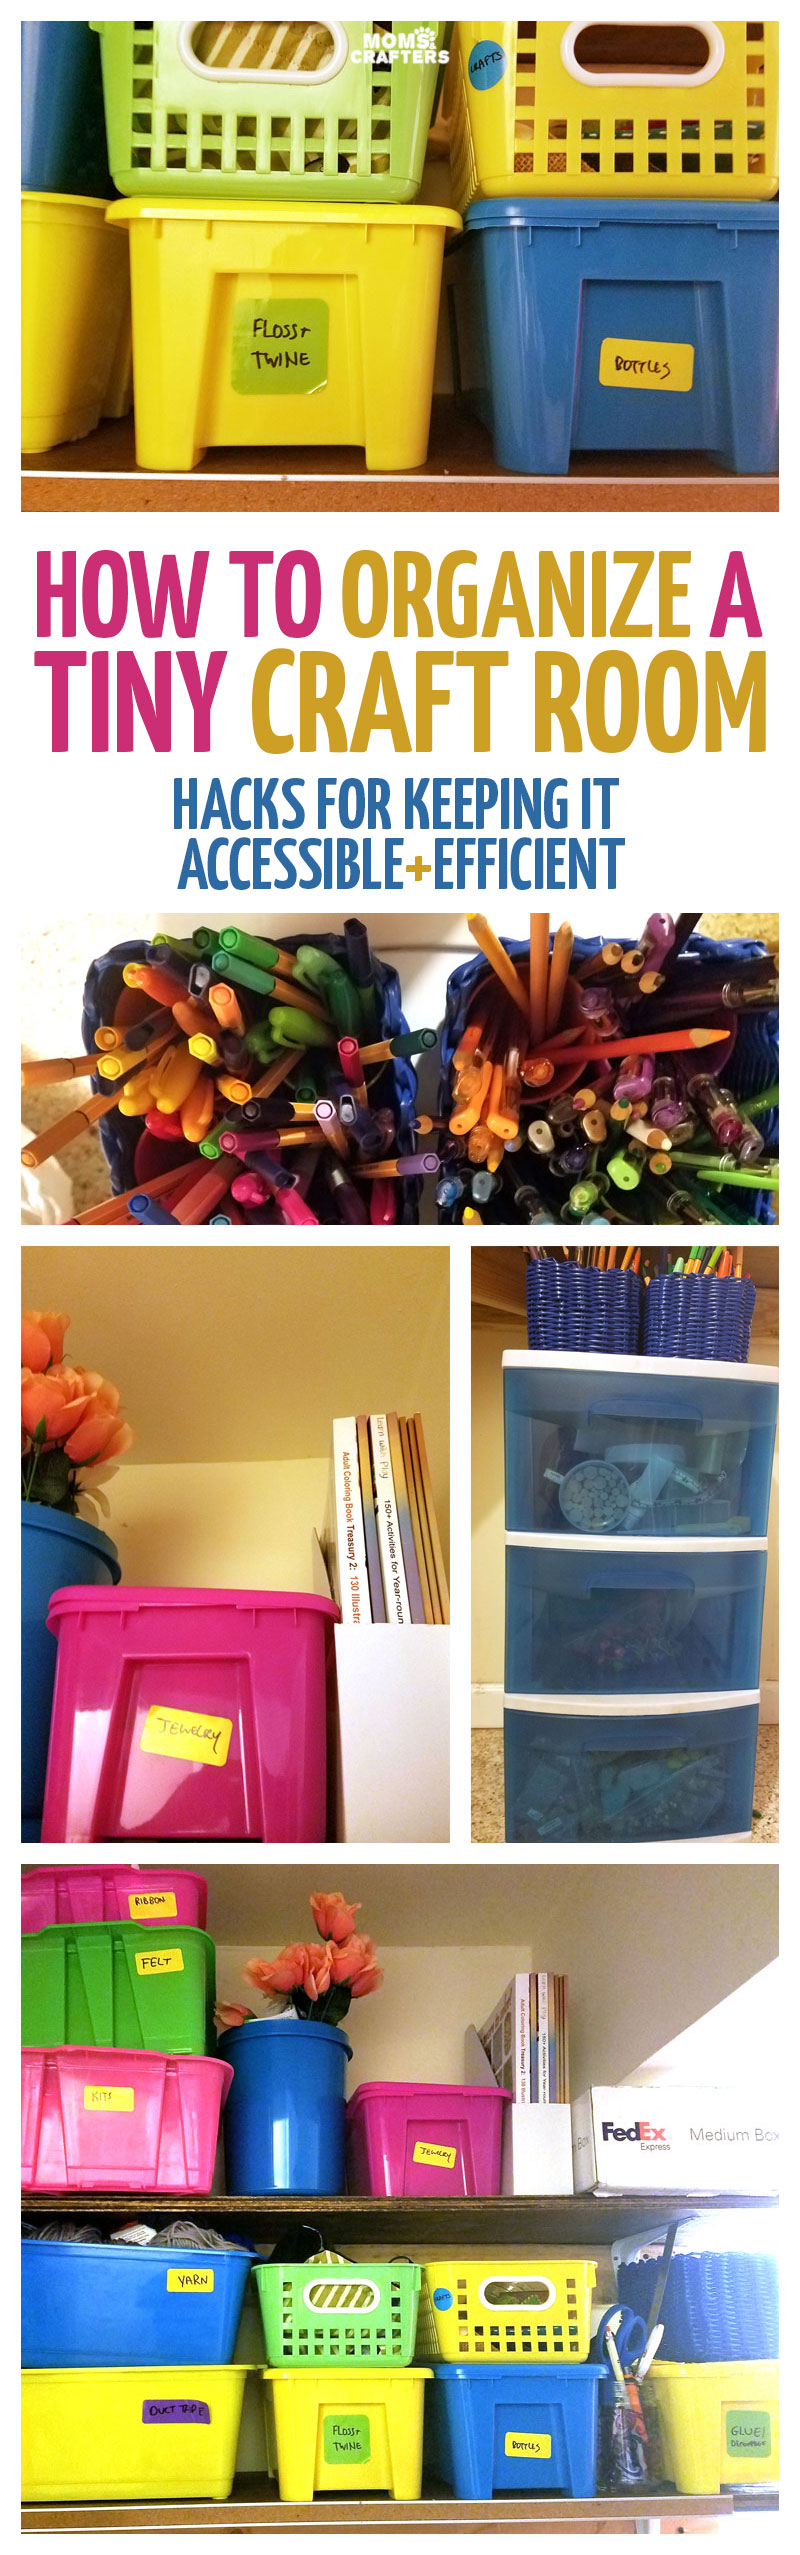 Craft room organization: how to organize a tiny craft room efficiently!